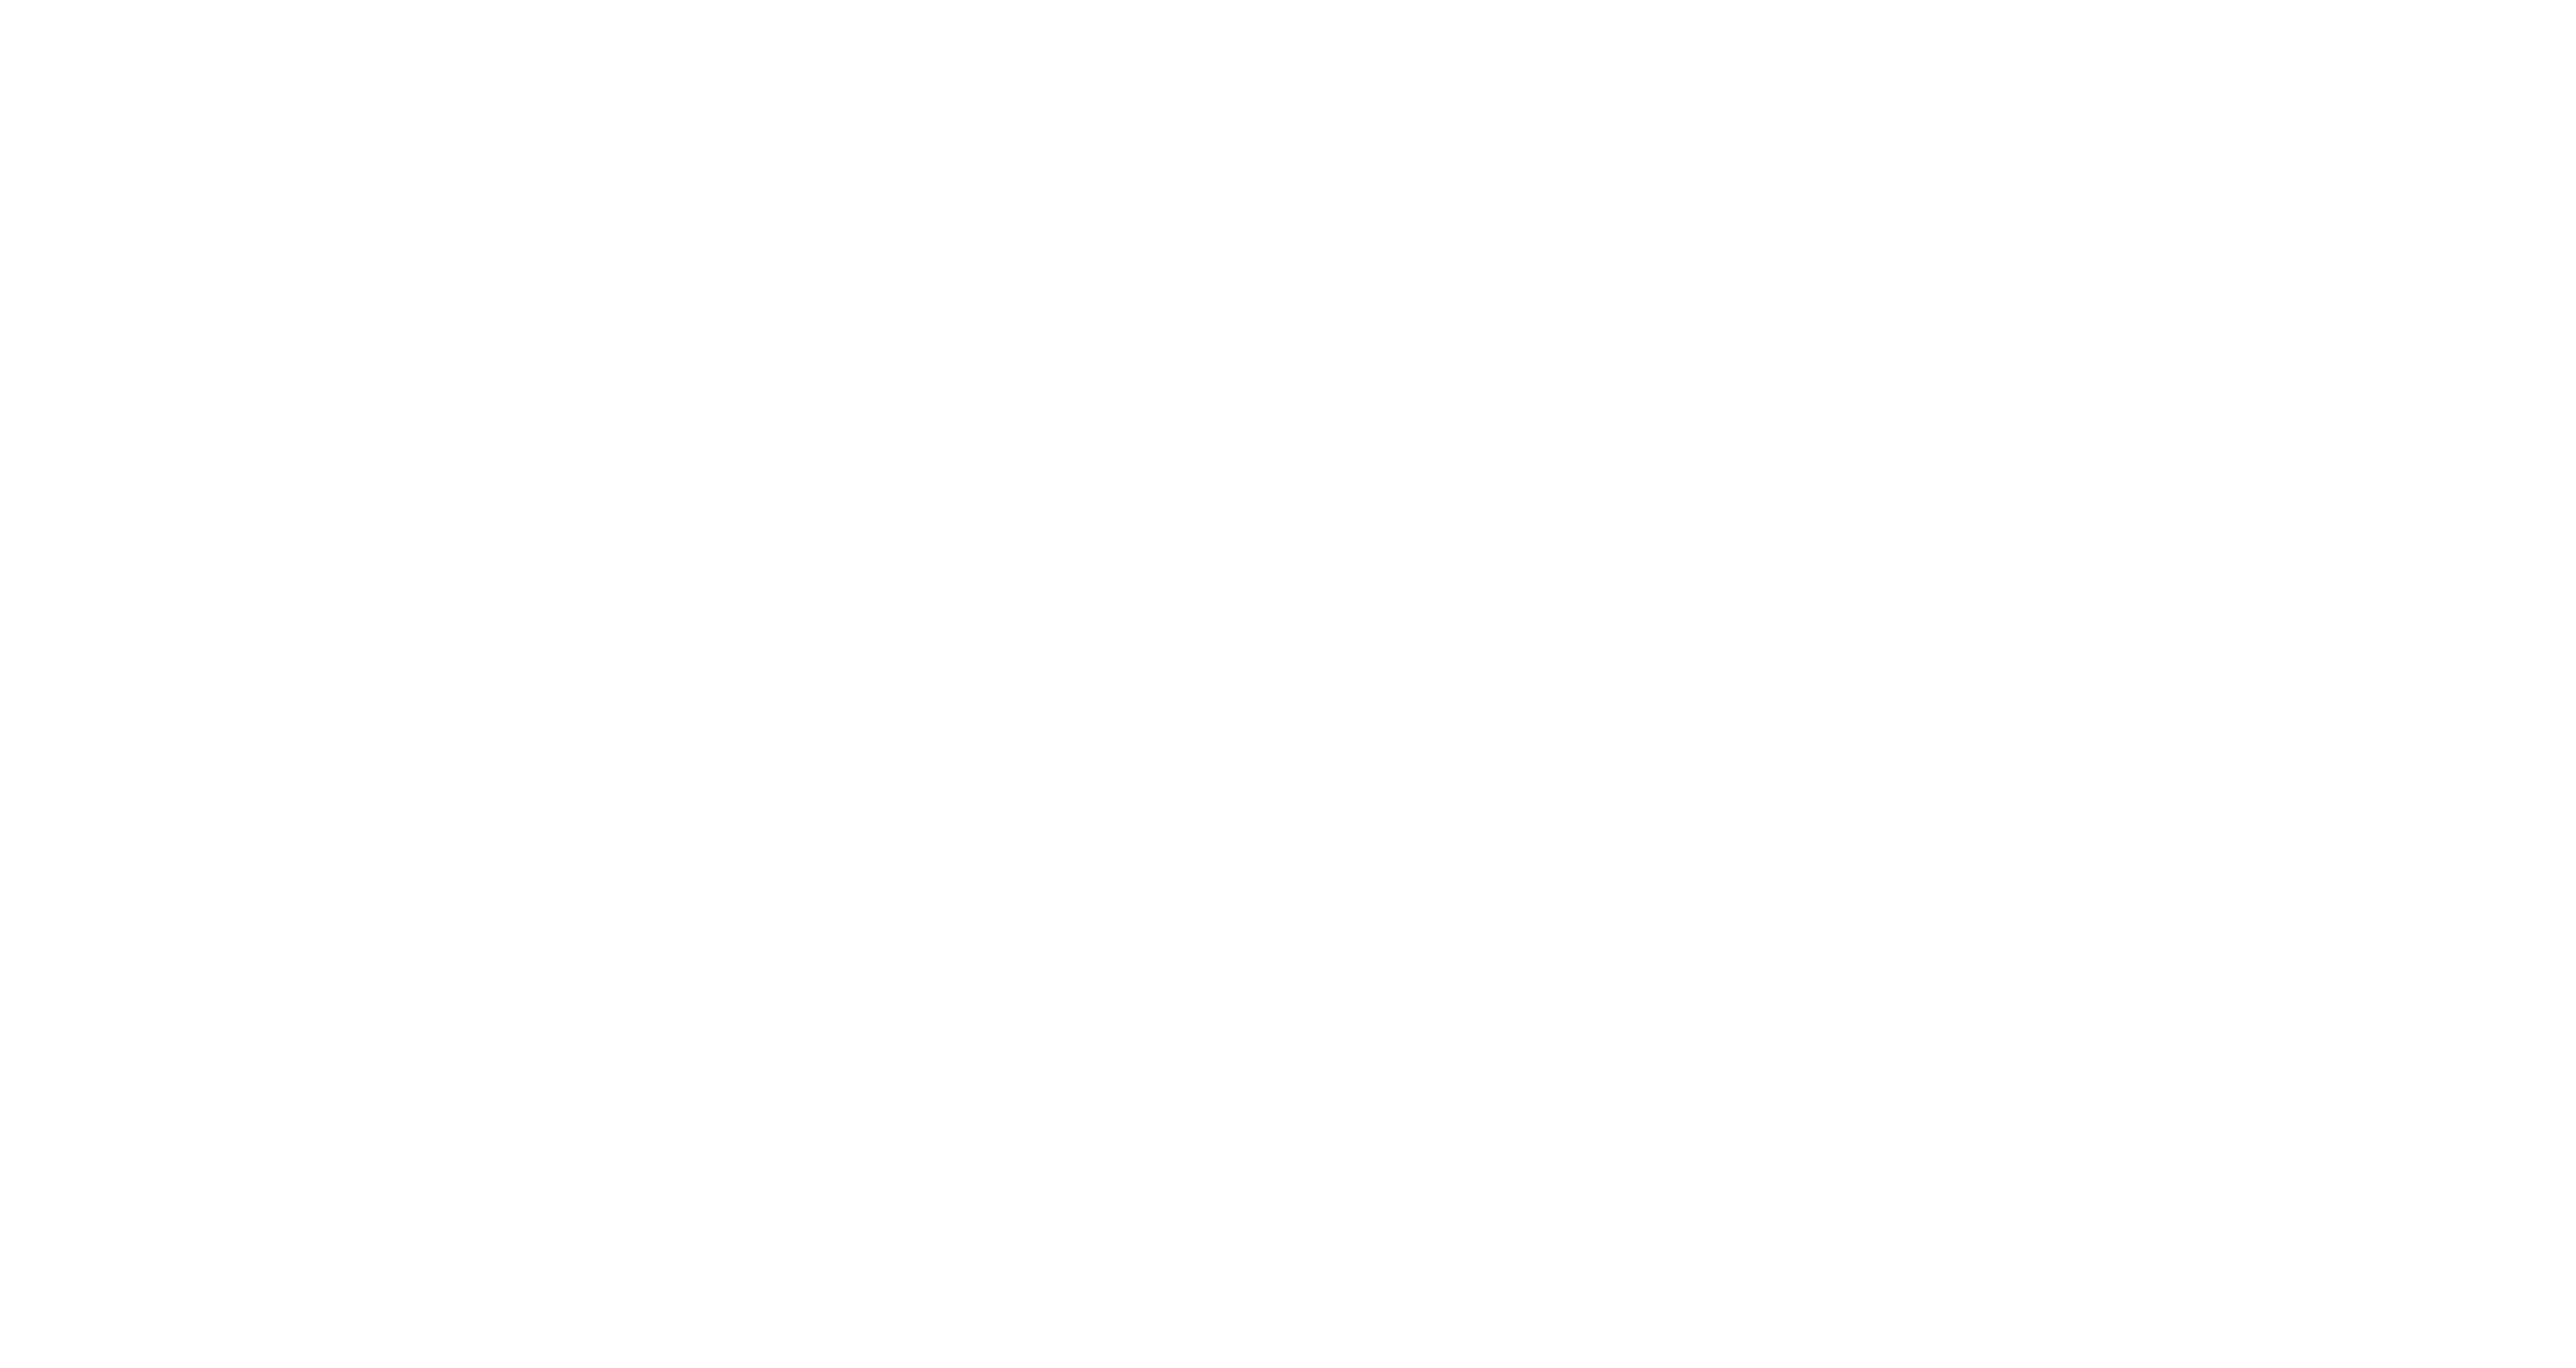 Illinois: Are you up for amazing?